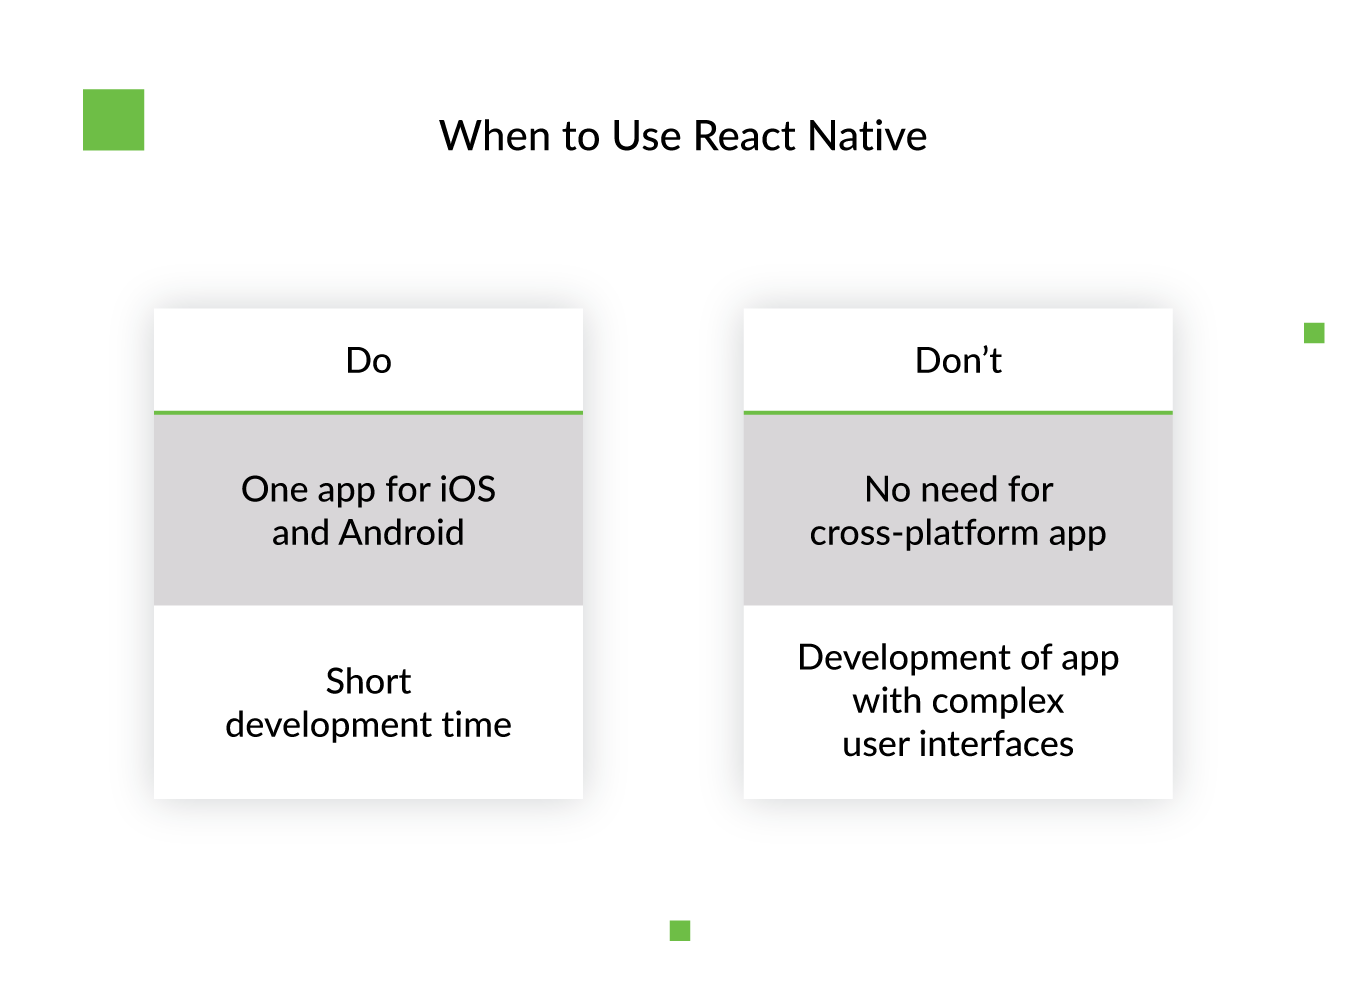 Building Your Next Mobile App with React Native: 4 Essential Benefits 2